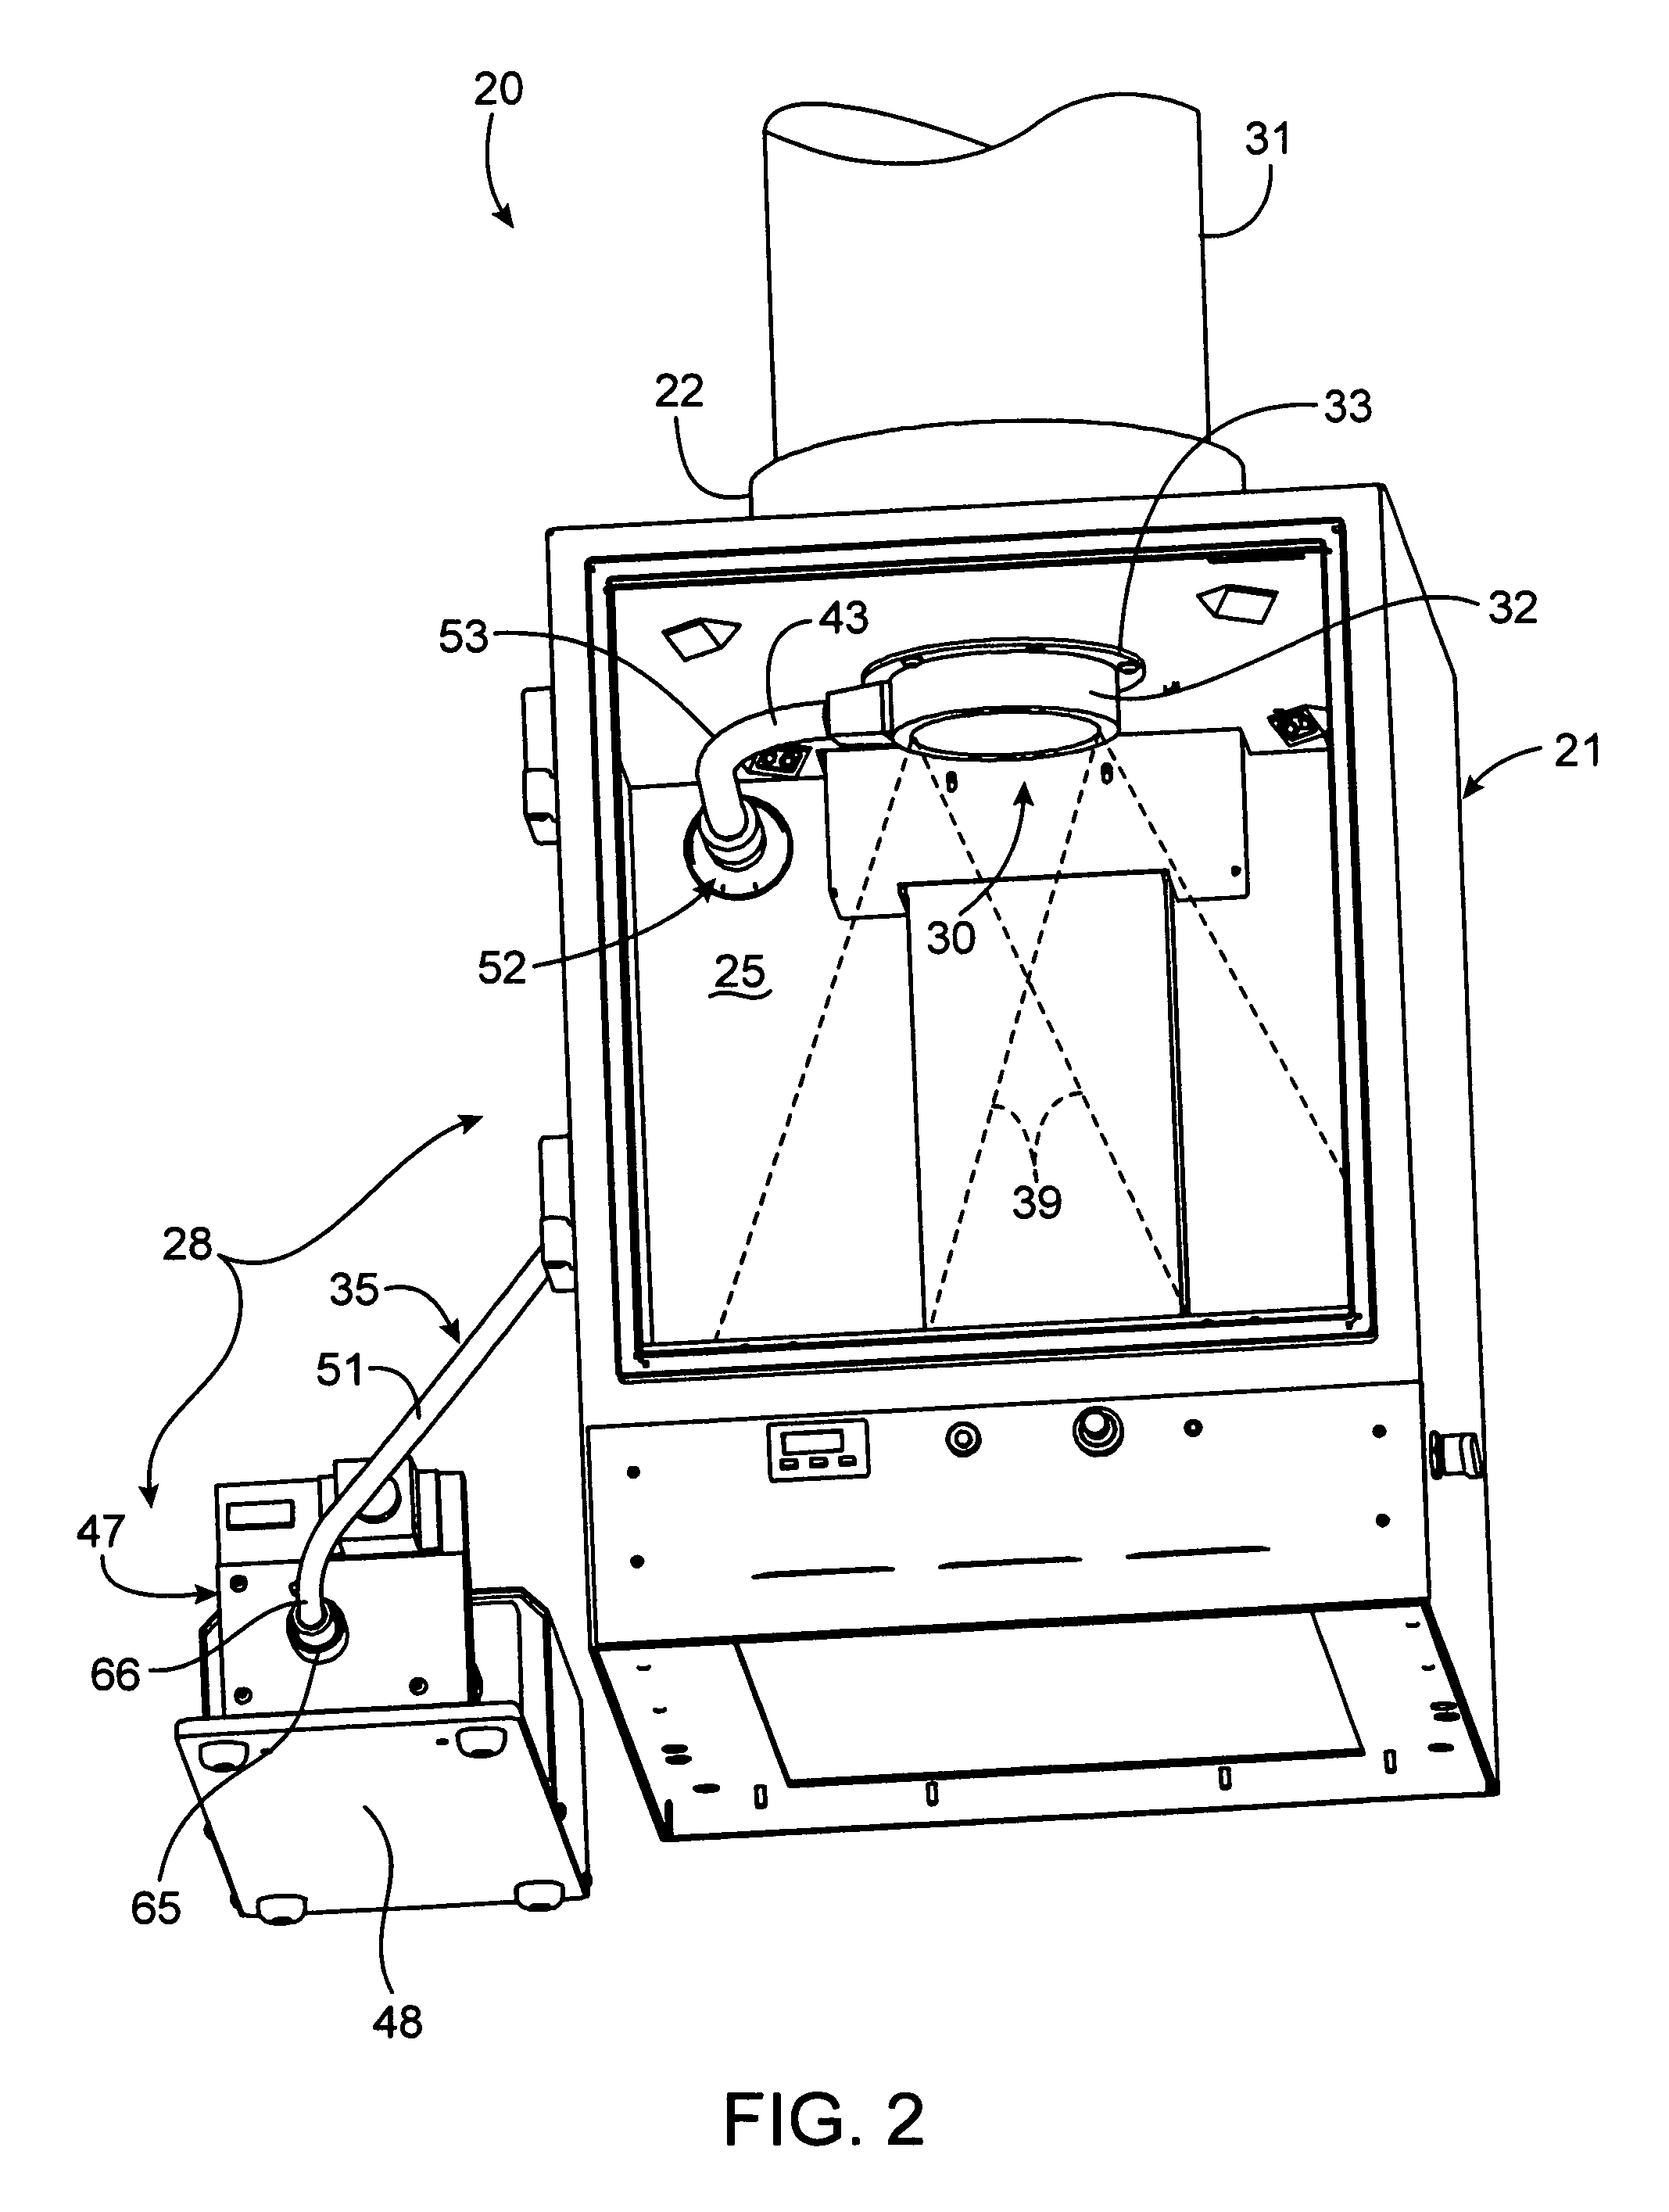 Illumination system for an imaging apparatus with low profile output device